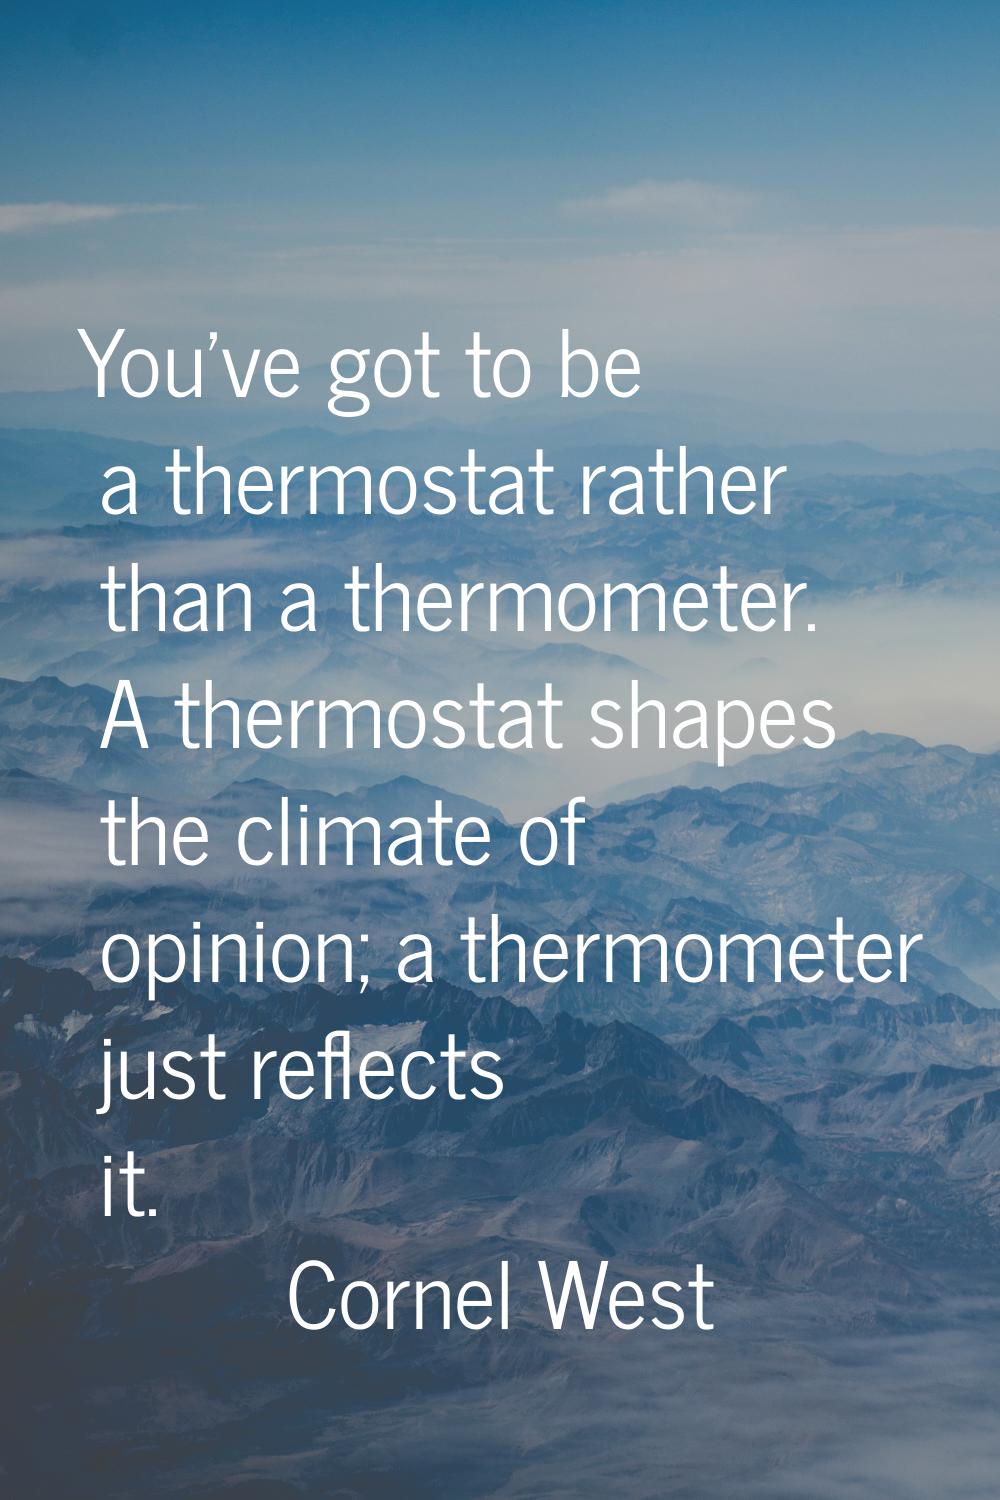 You've got to be a thermostat rather than a thermometer. A thermostat shapes the climate of opinion